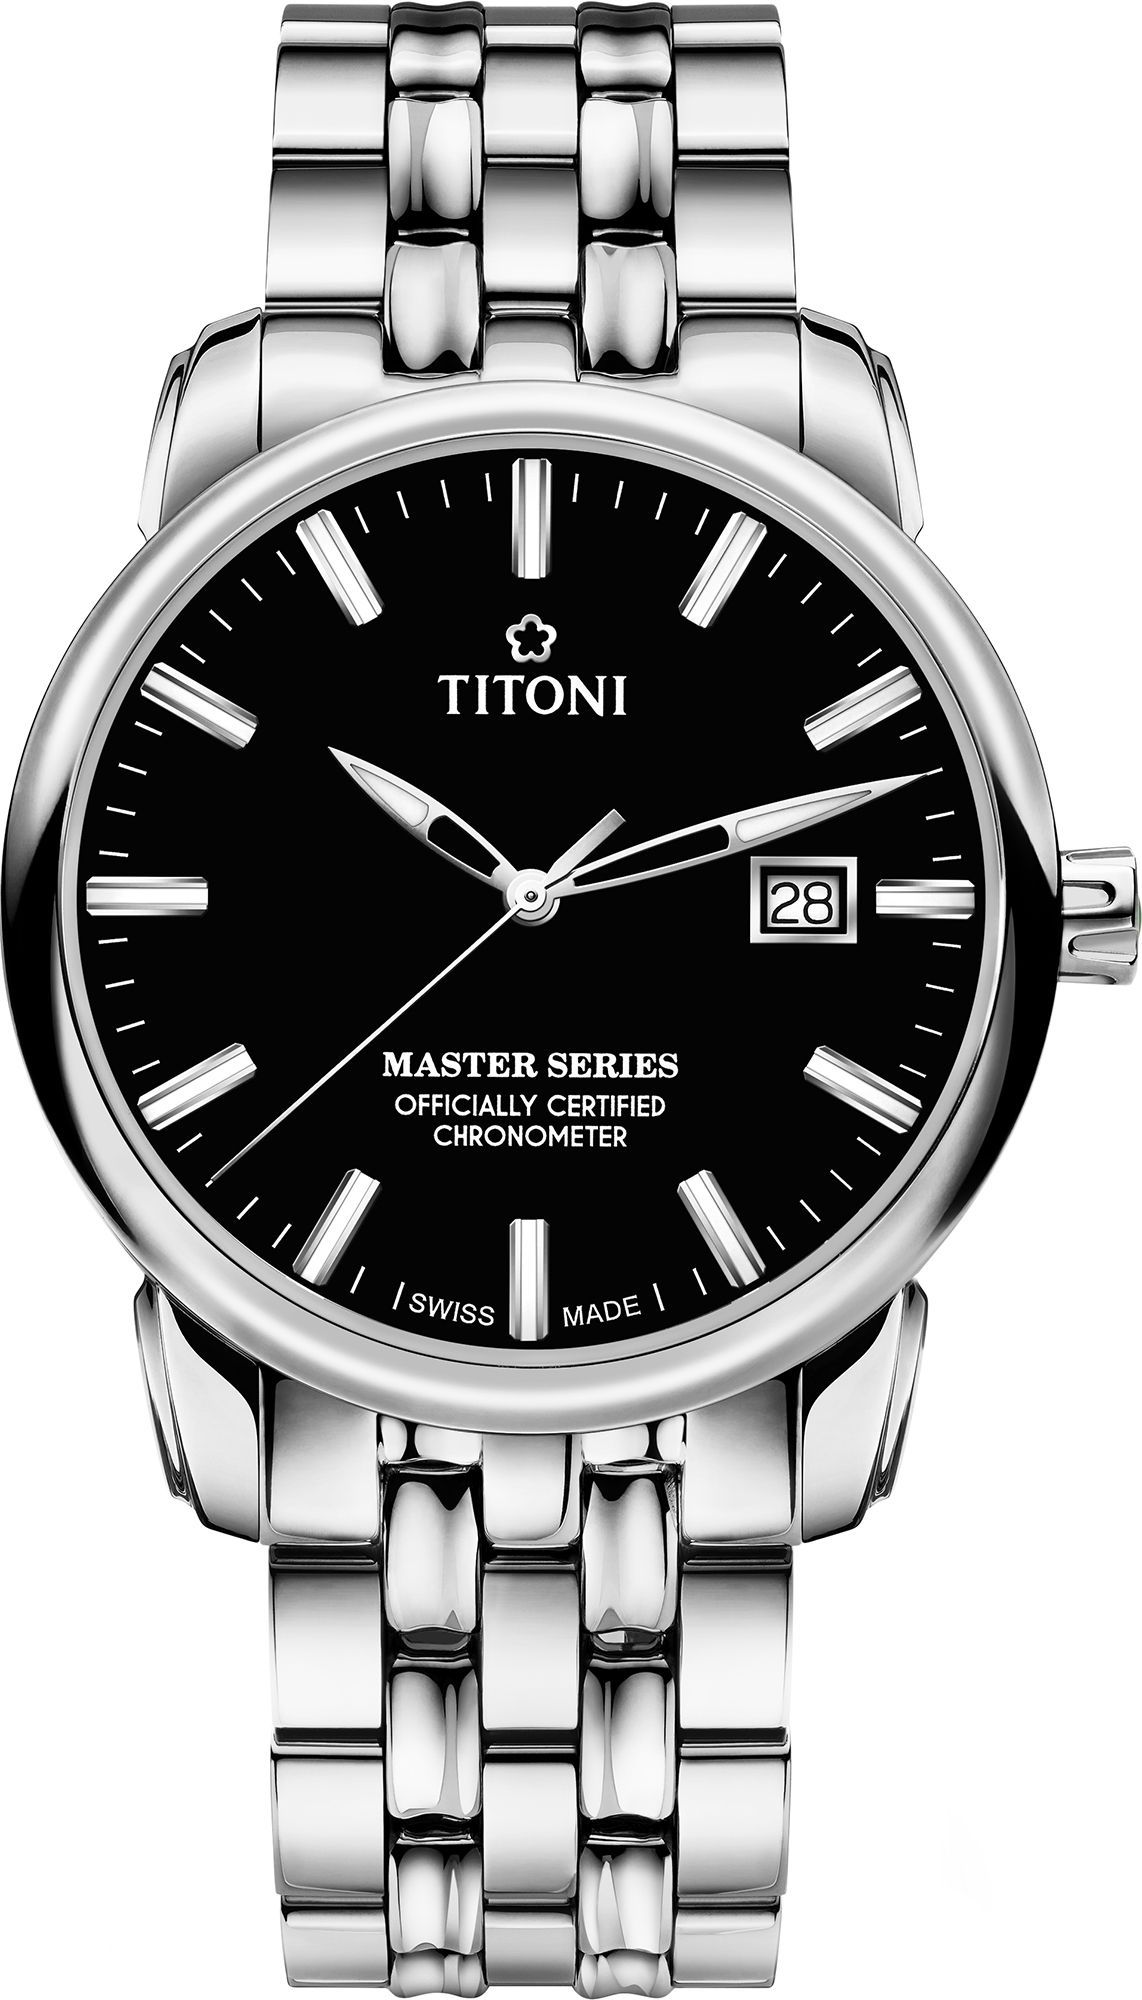 Titoni Master Series  Black Dial 41 mm Automatic Watch For Men - 1